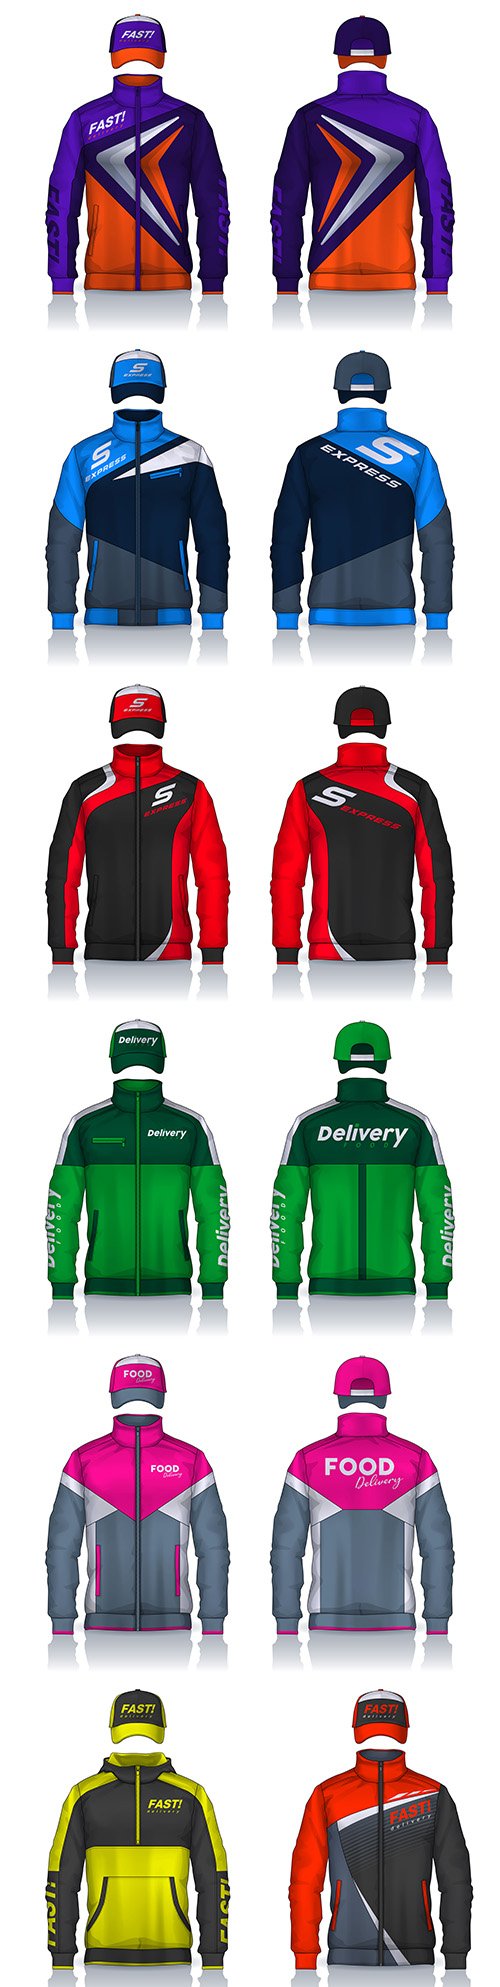 Uniform delivery design jackets, caps and shirts with inscriptions